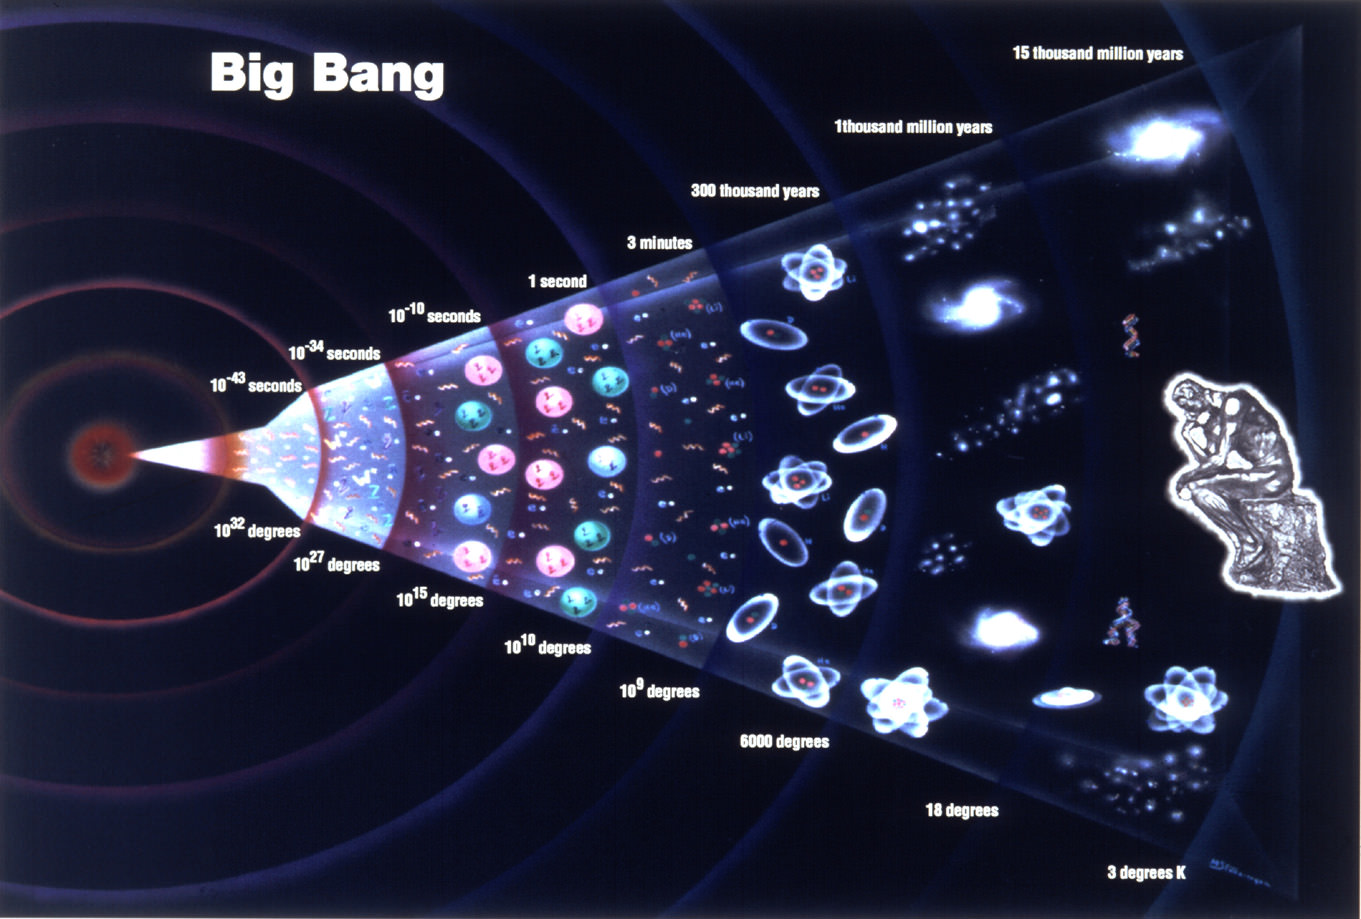 https://www.universetoday.com/54756/what-is-the-big-bang-theory/